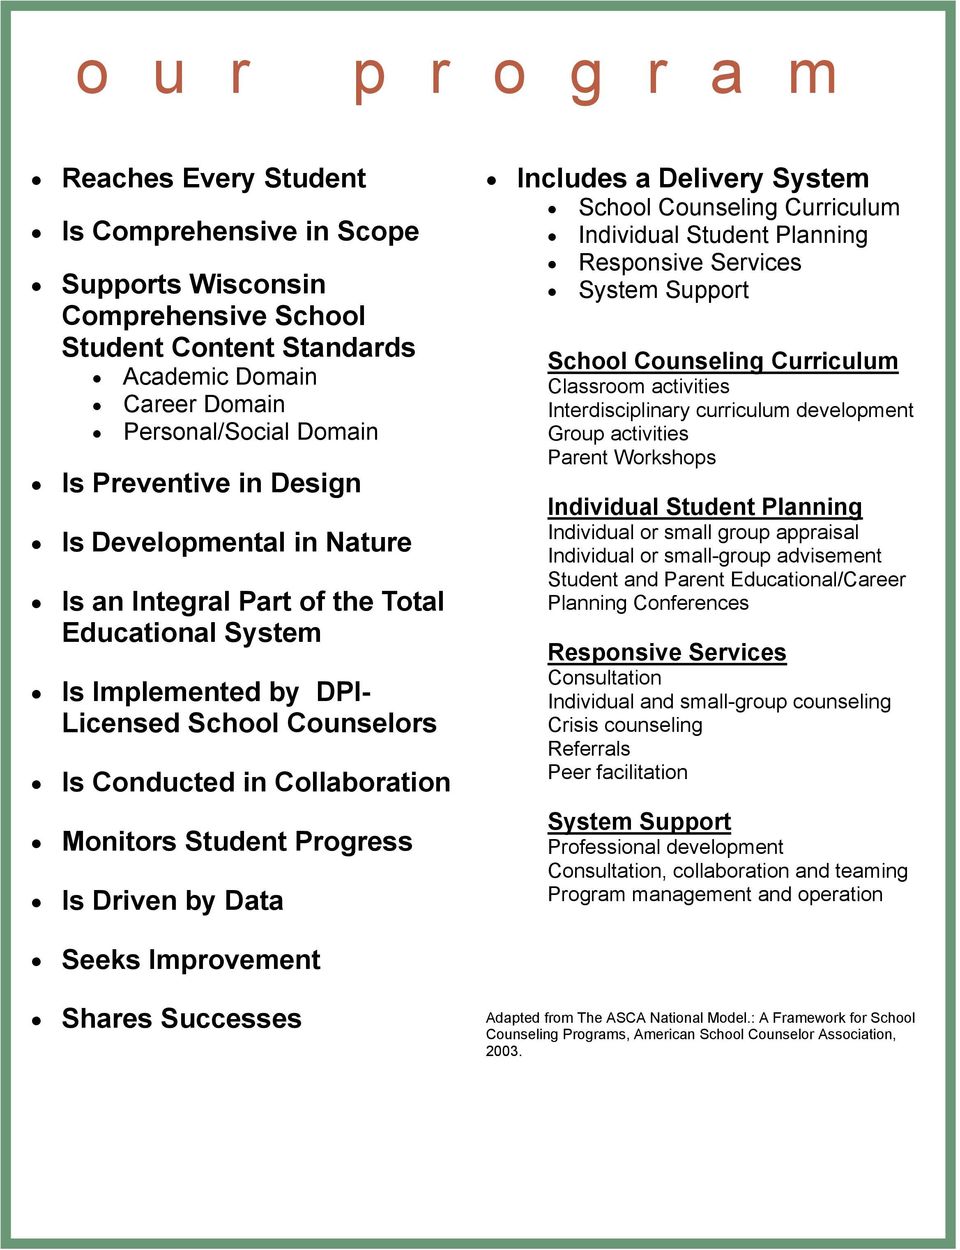 Progress Is Driven by Data Includes a Delivery System School Curriculum Student Responsive Services System Support School Curriculum Classroom activities Interdisciplinary curriculum development